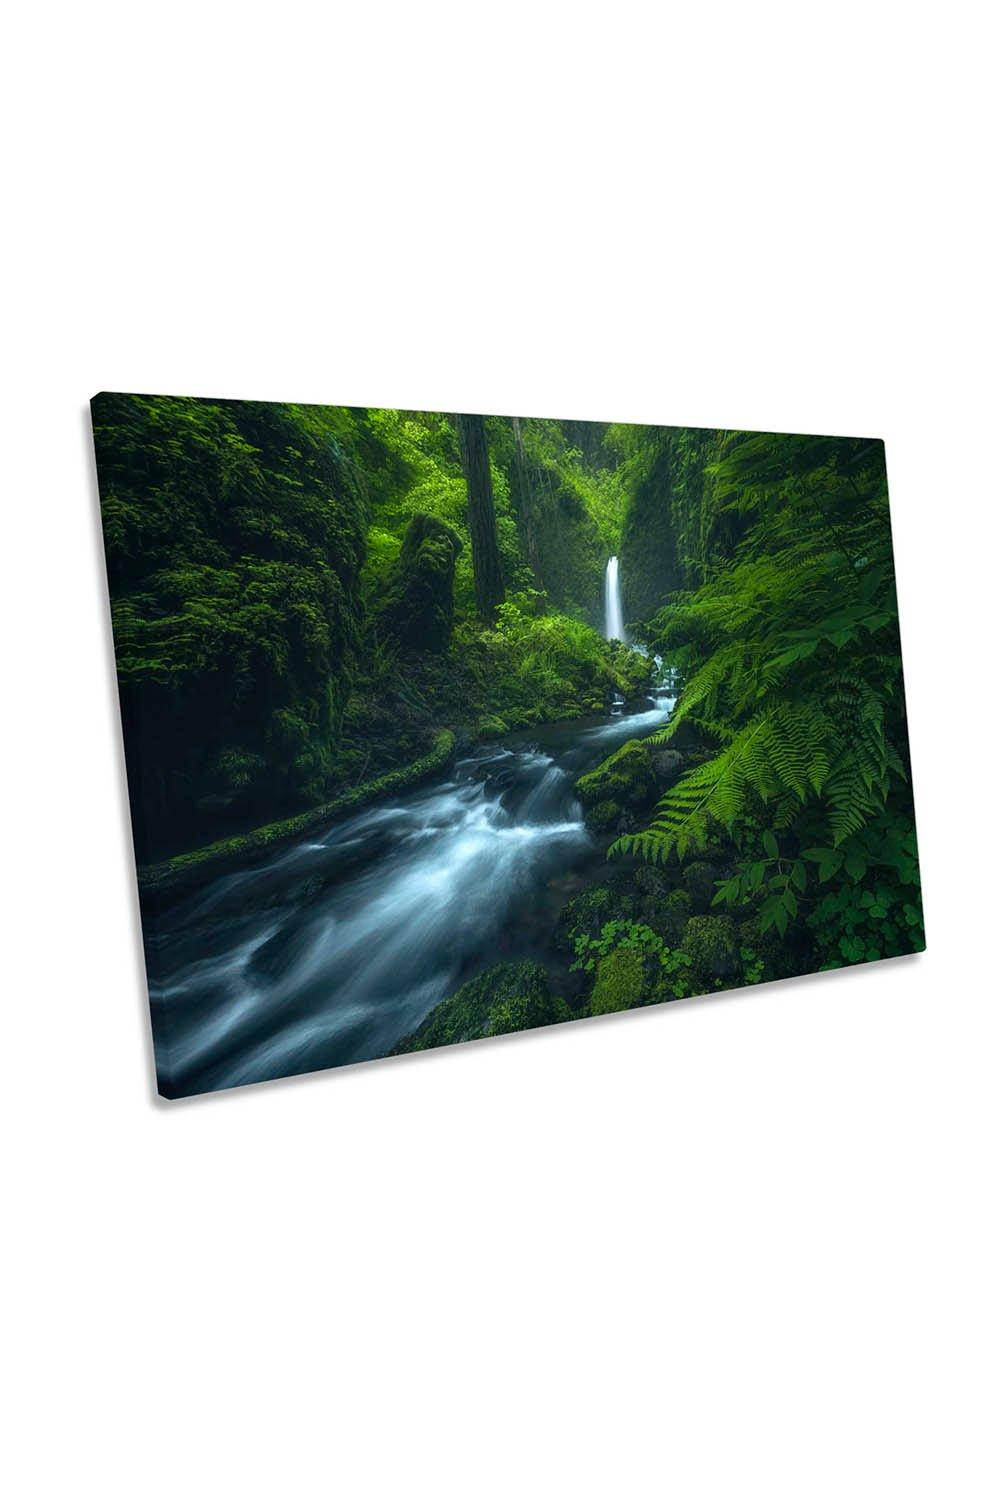 Green Woodland River Creek Canvas Wall Art Picture Print